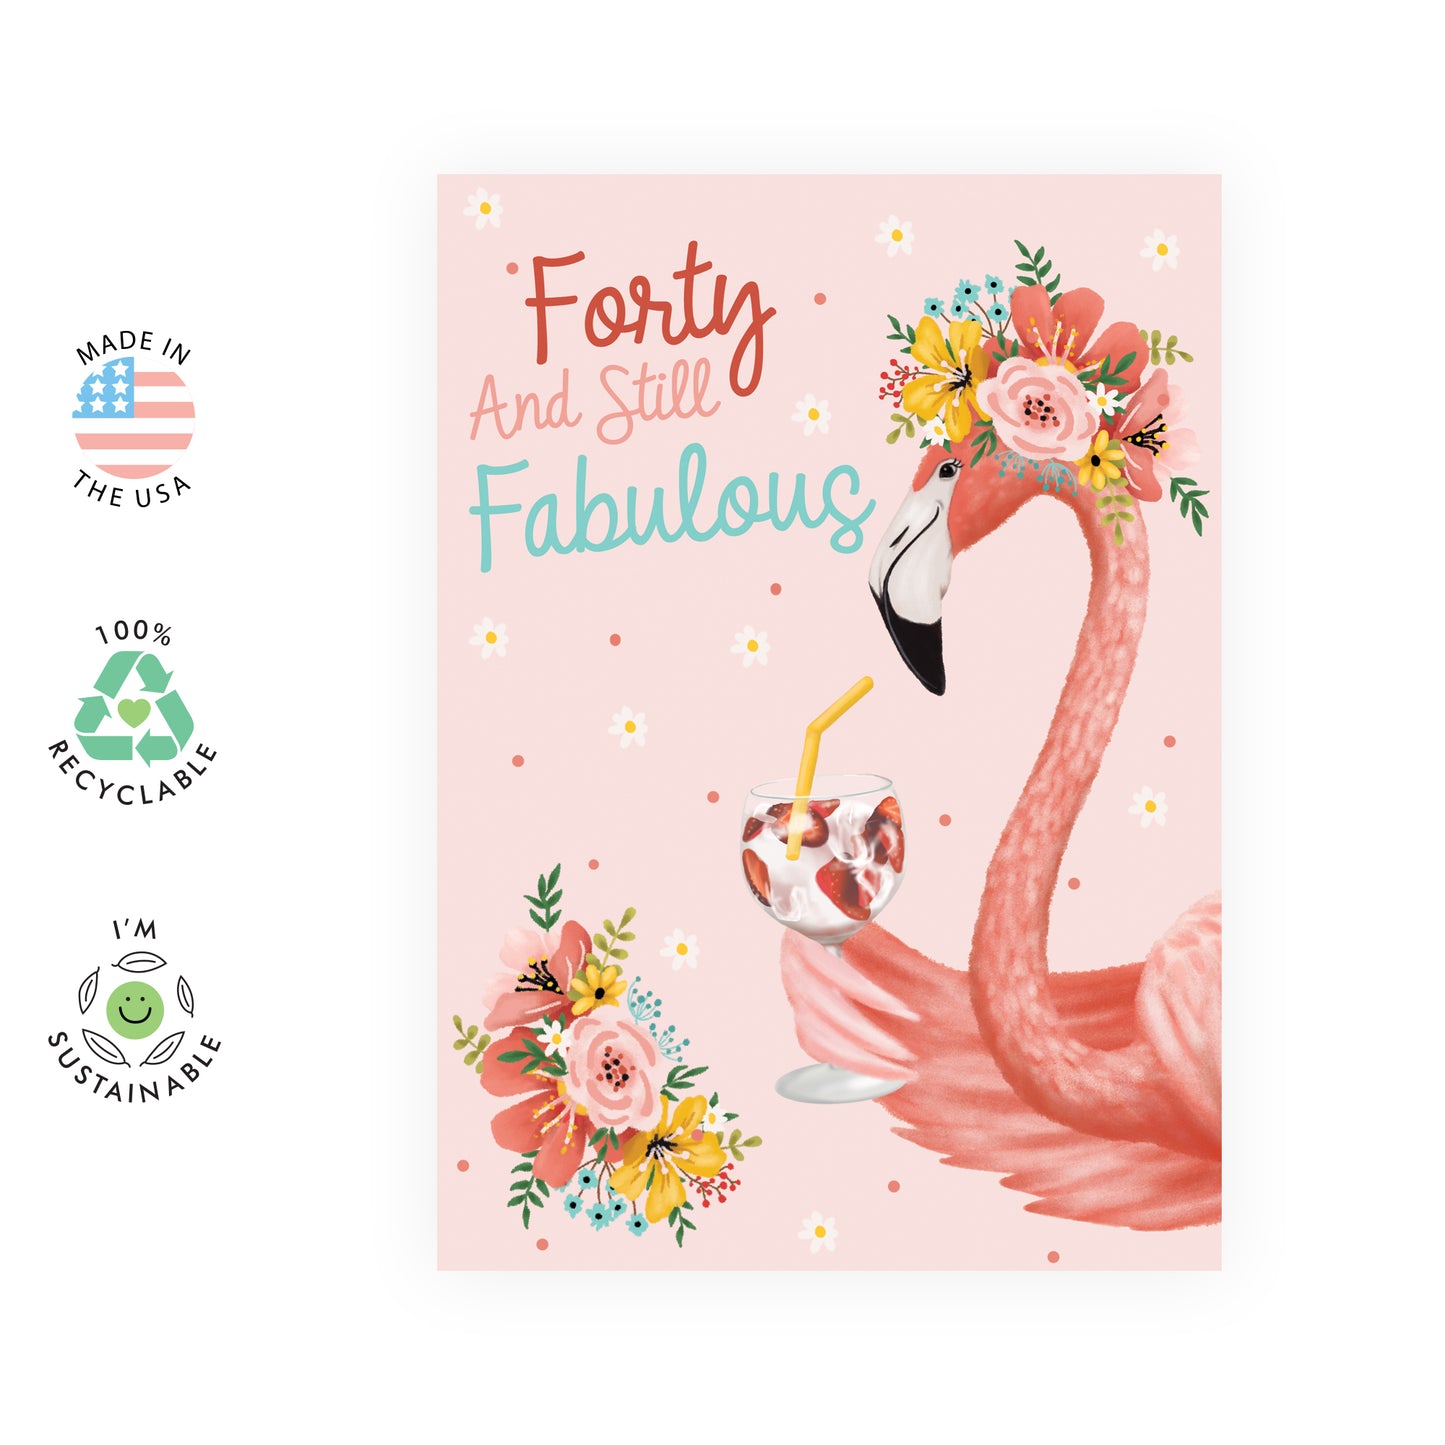 40th Birthday Card - Forty And Still Fabulous - For Women Wife Her